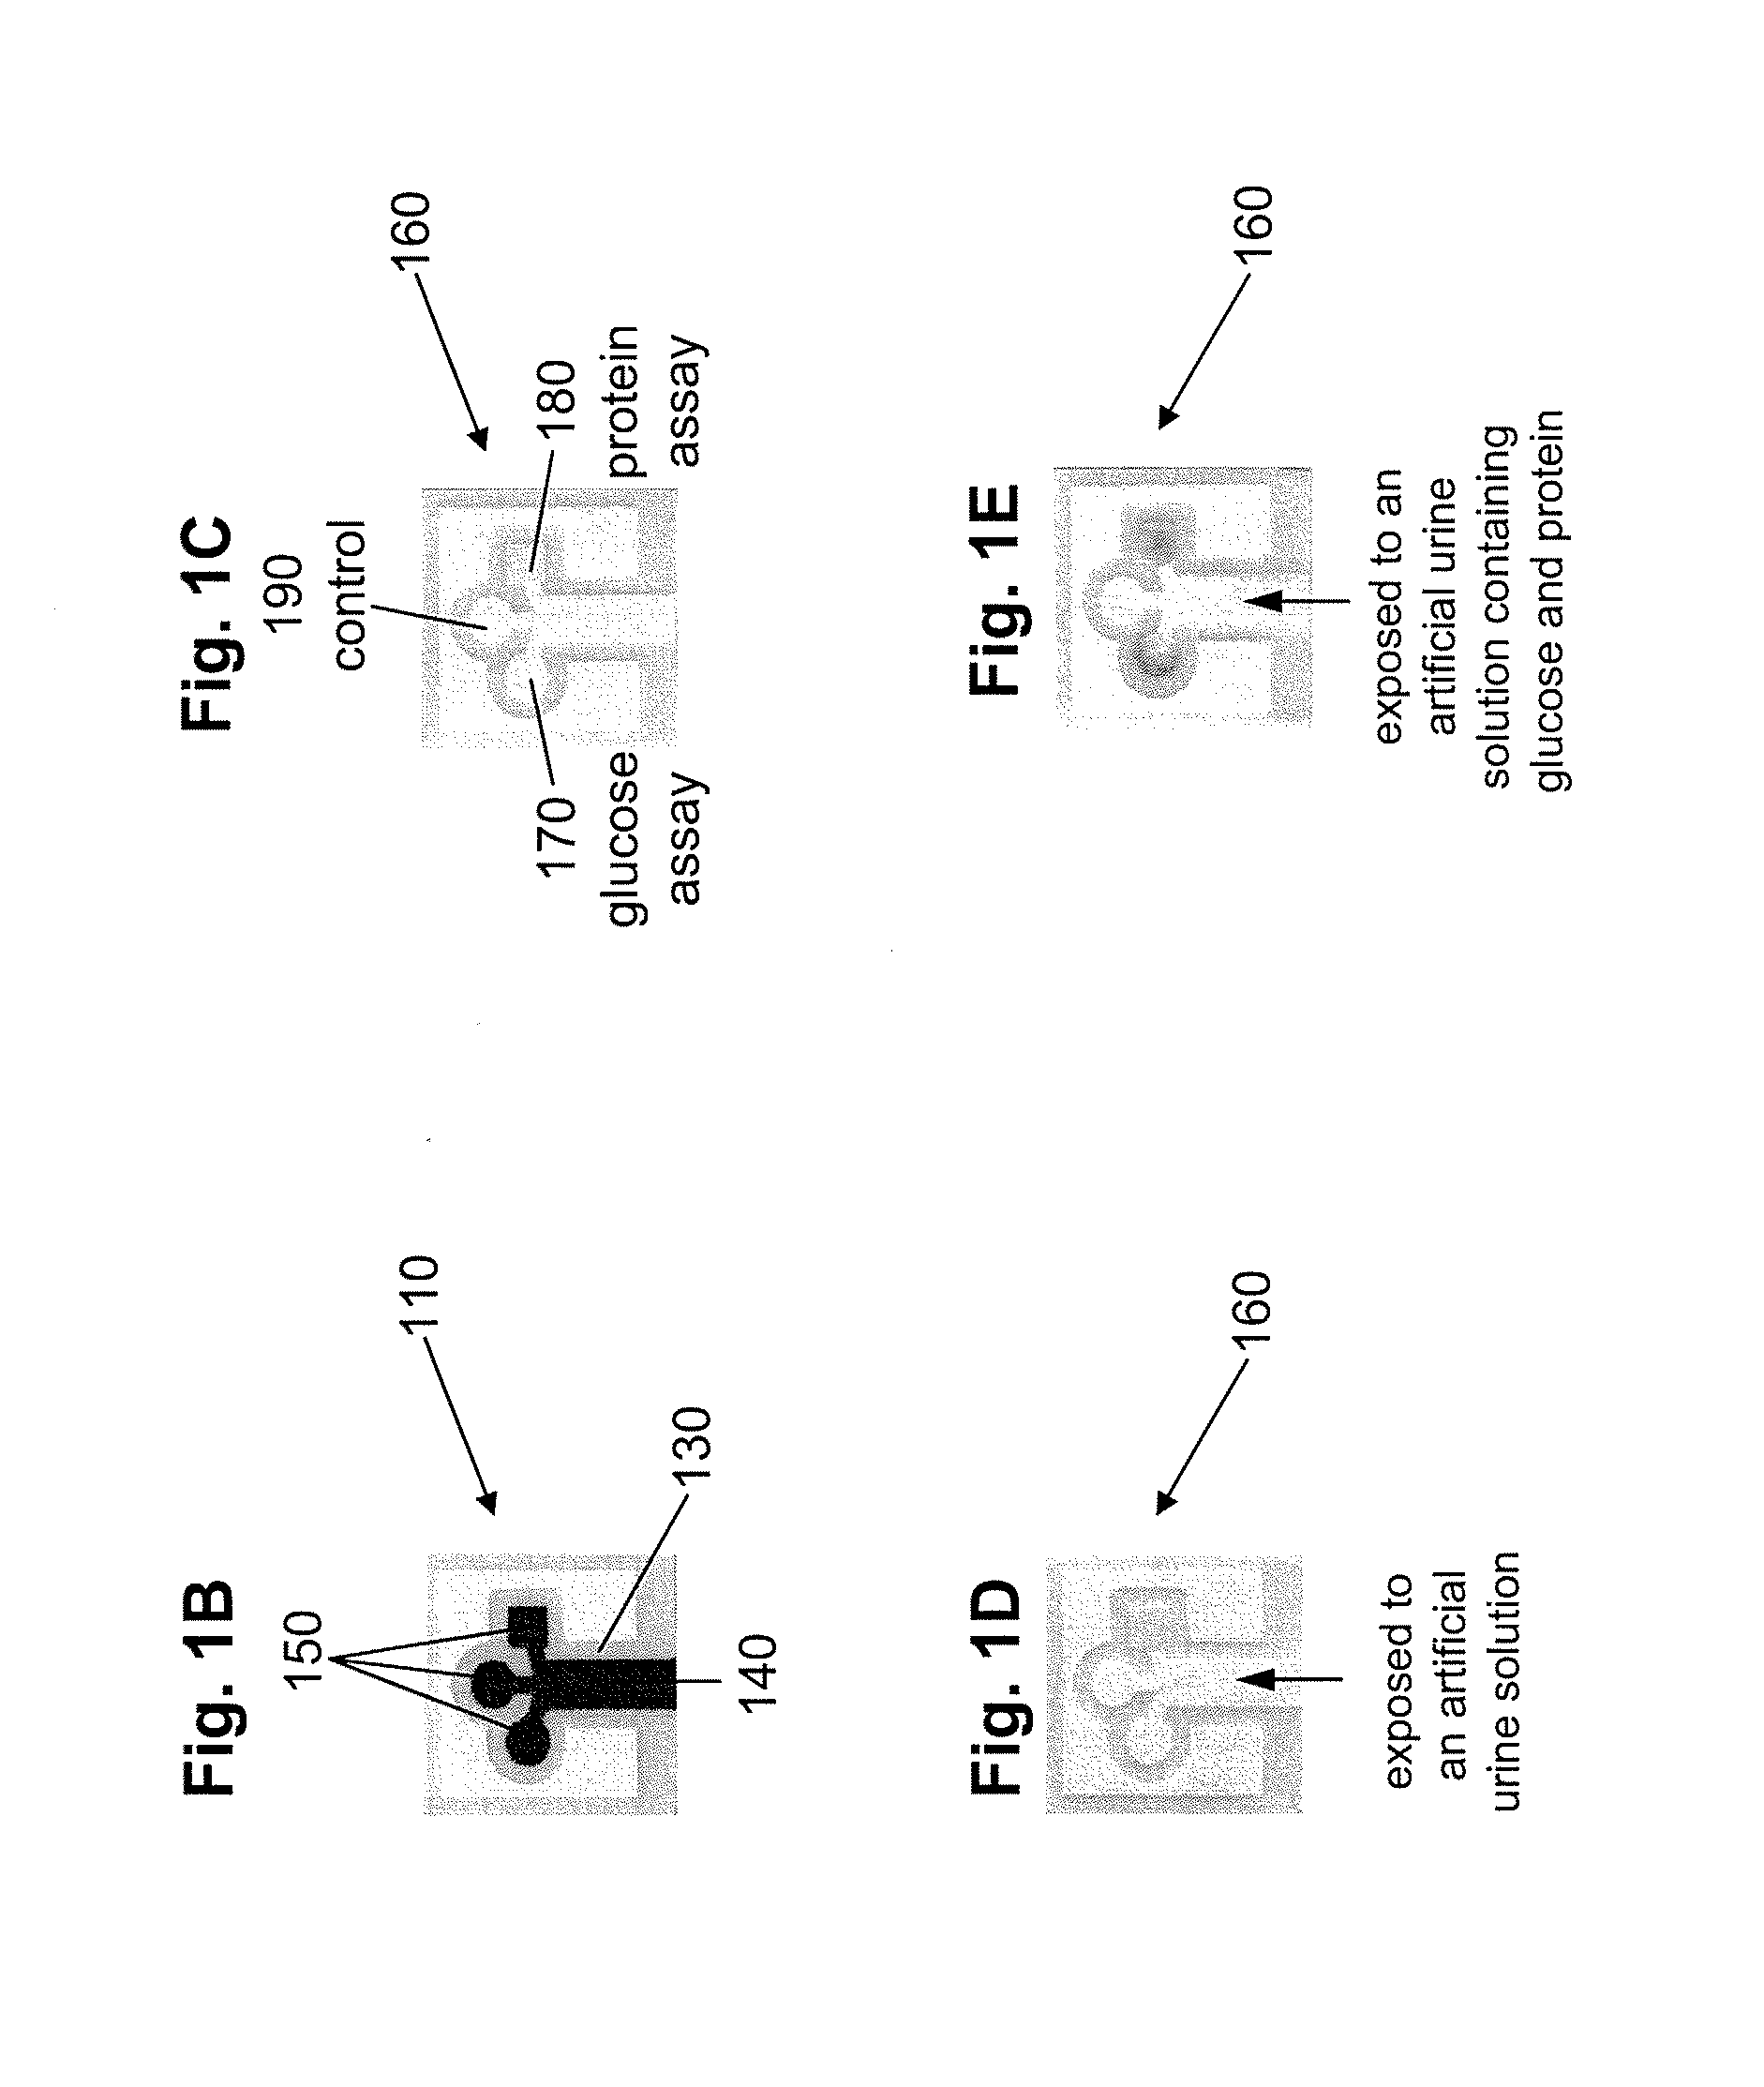 Lateral Flow and Flow-through Bioassay Devices Based On Patterned Porous Media, Methods of Making Same, and Methods of Using Same